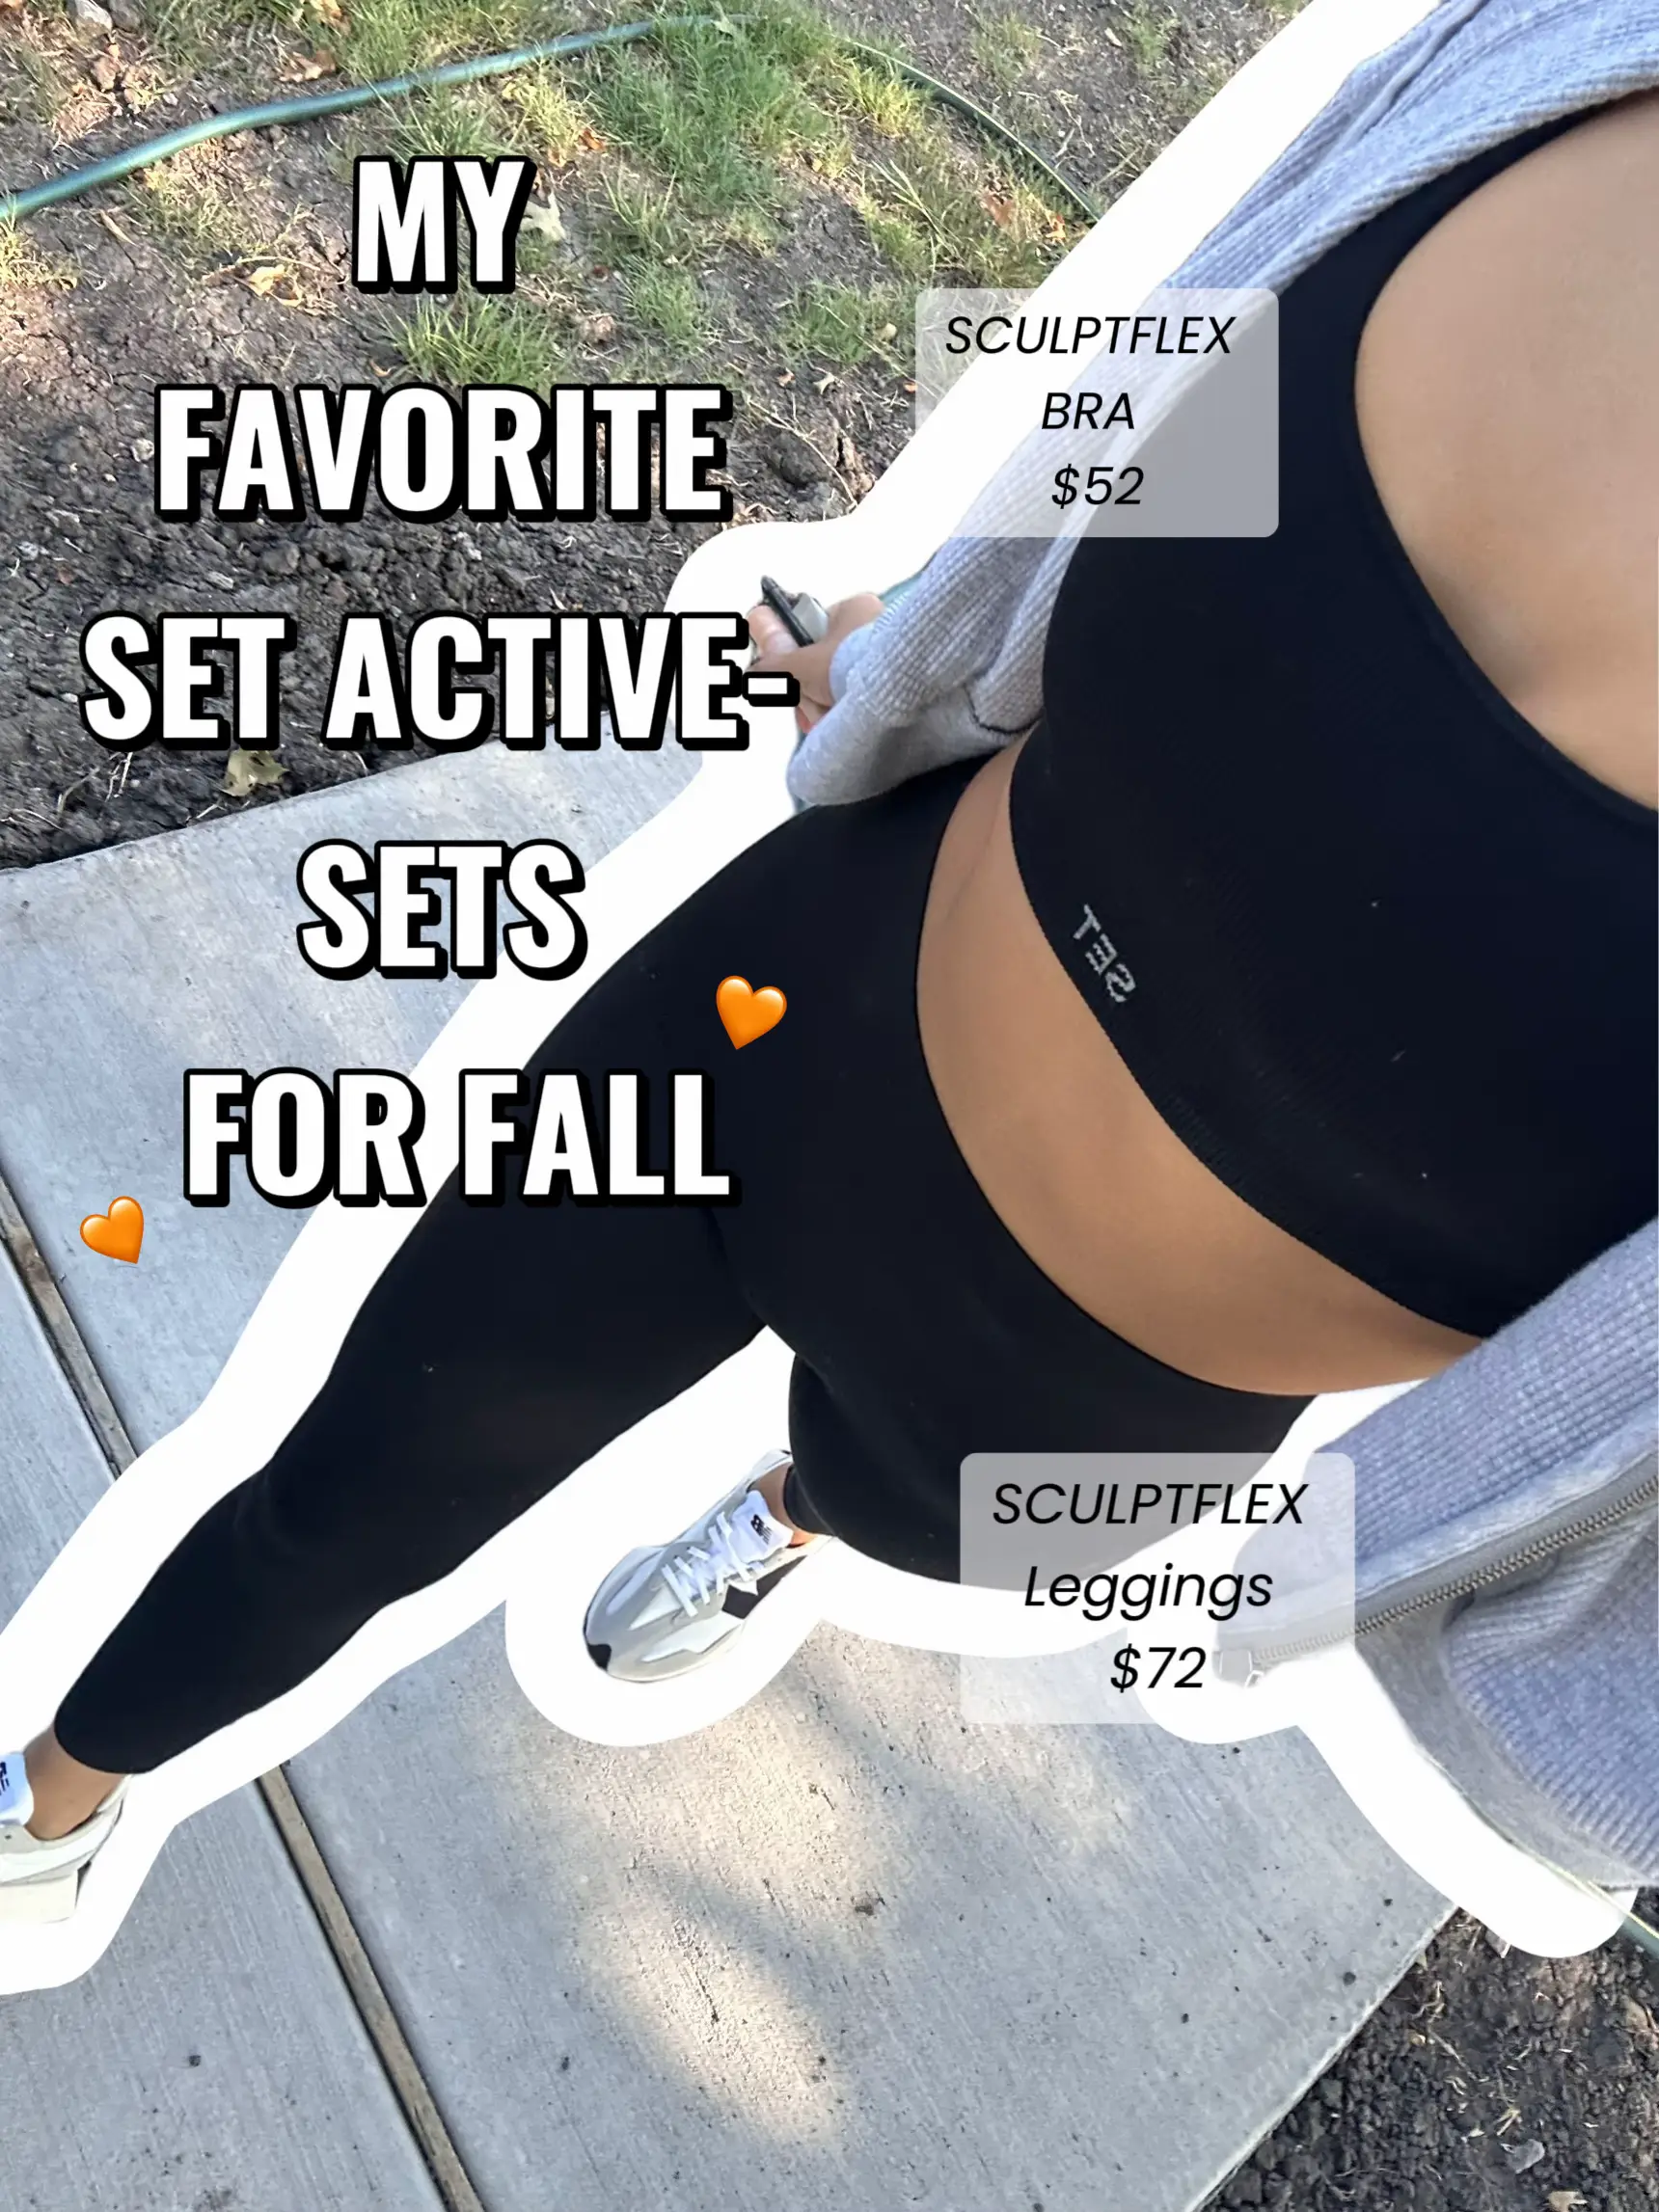 Thank you Aimee, the bra is perf! : r/SETActive